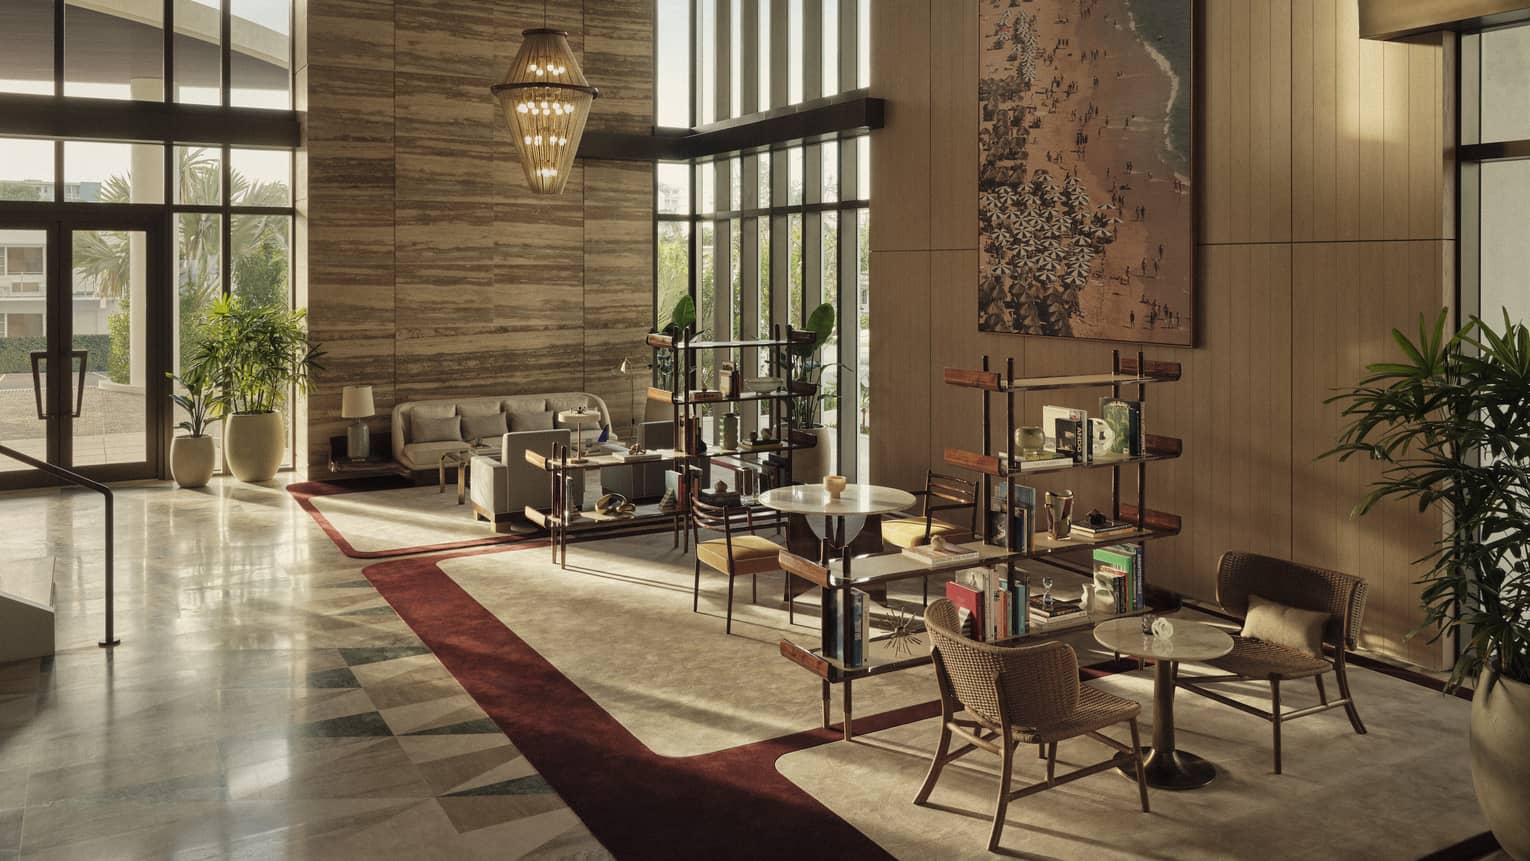 The lobby area of a hotel with chairs, sofas, small tables, shelves, and large wall art.